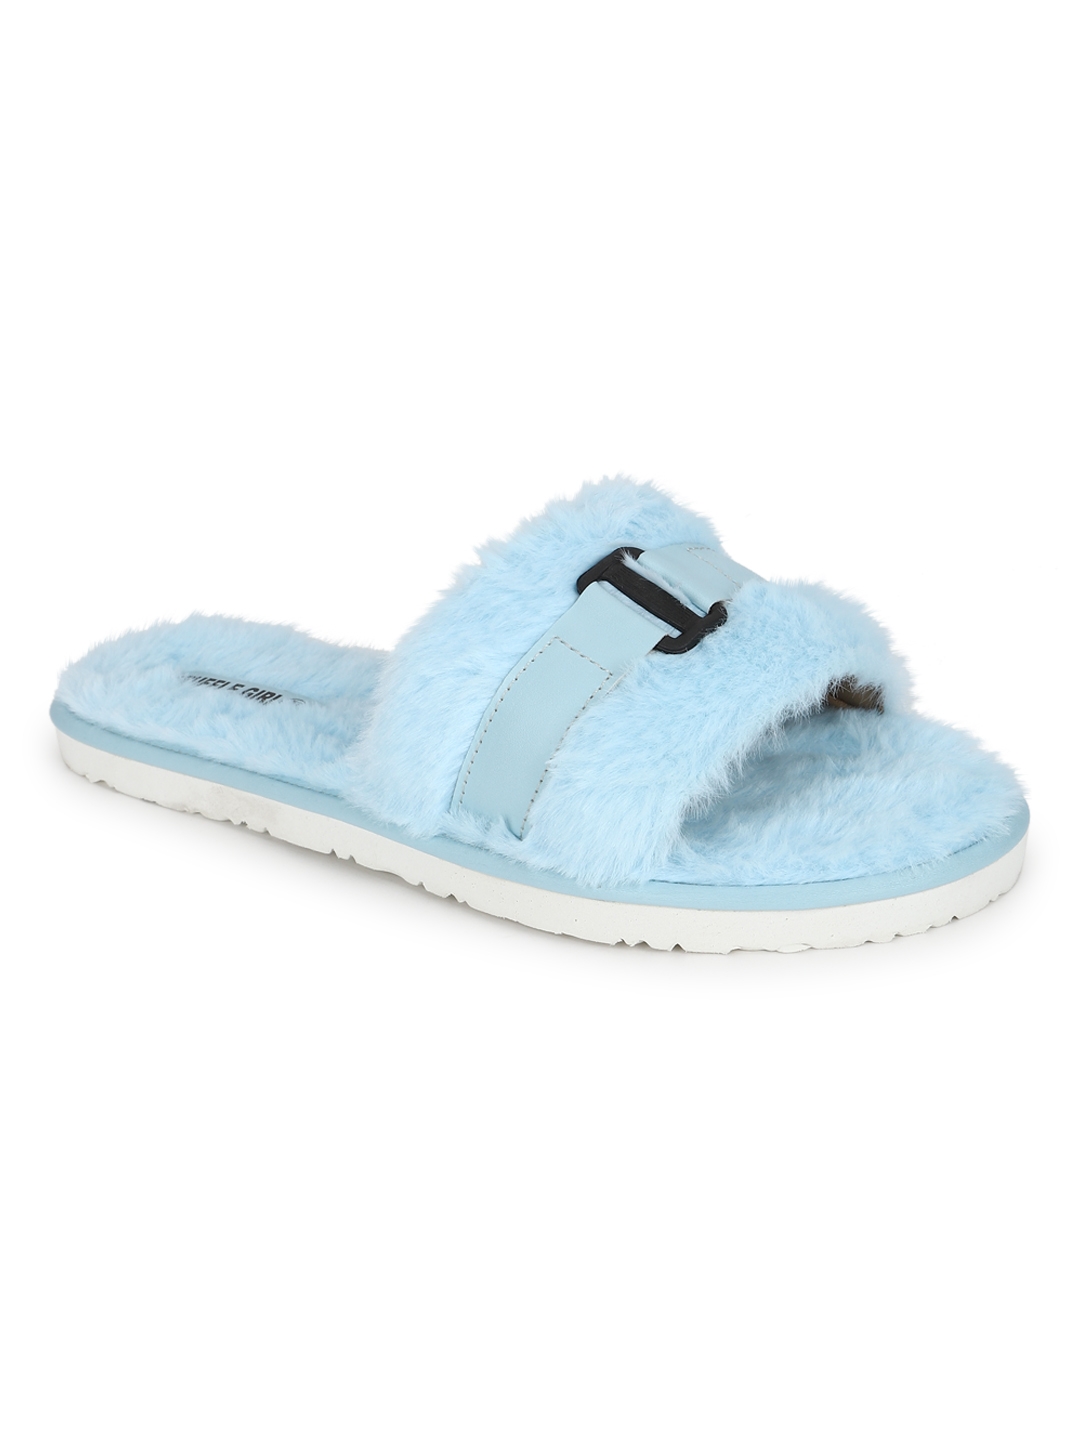 Truffle Collection | Blue Fuzzy Fur Slip Ons With Buckle